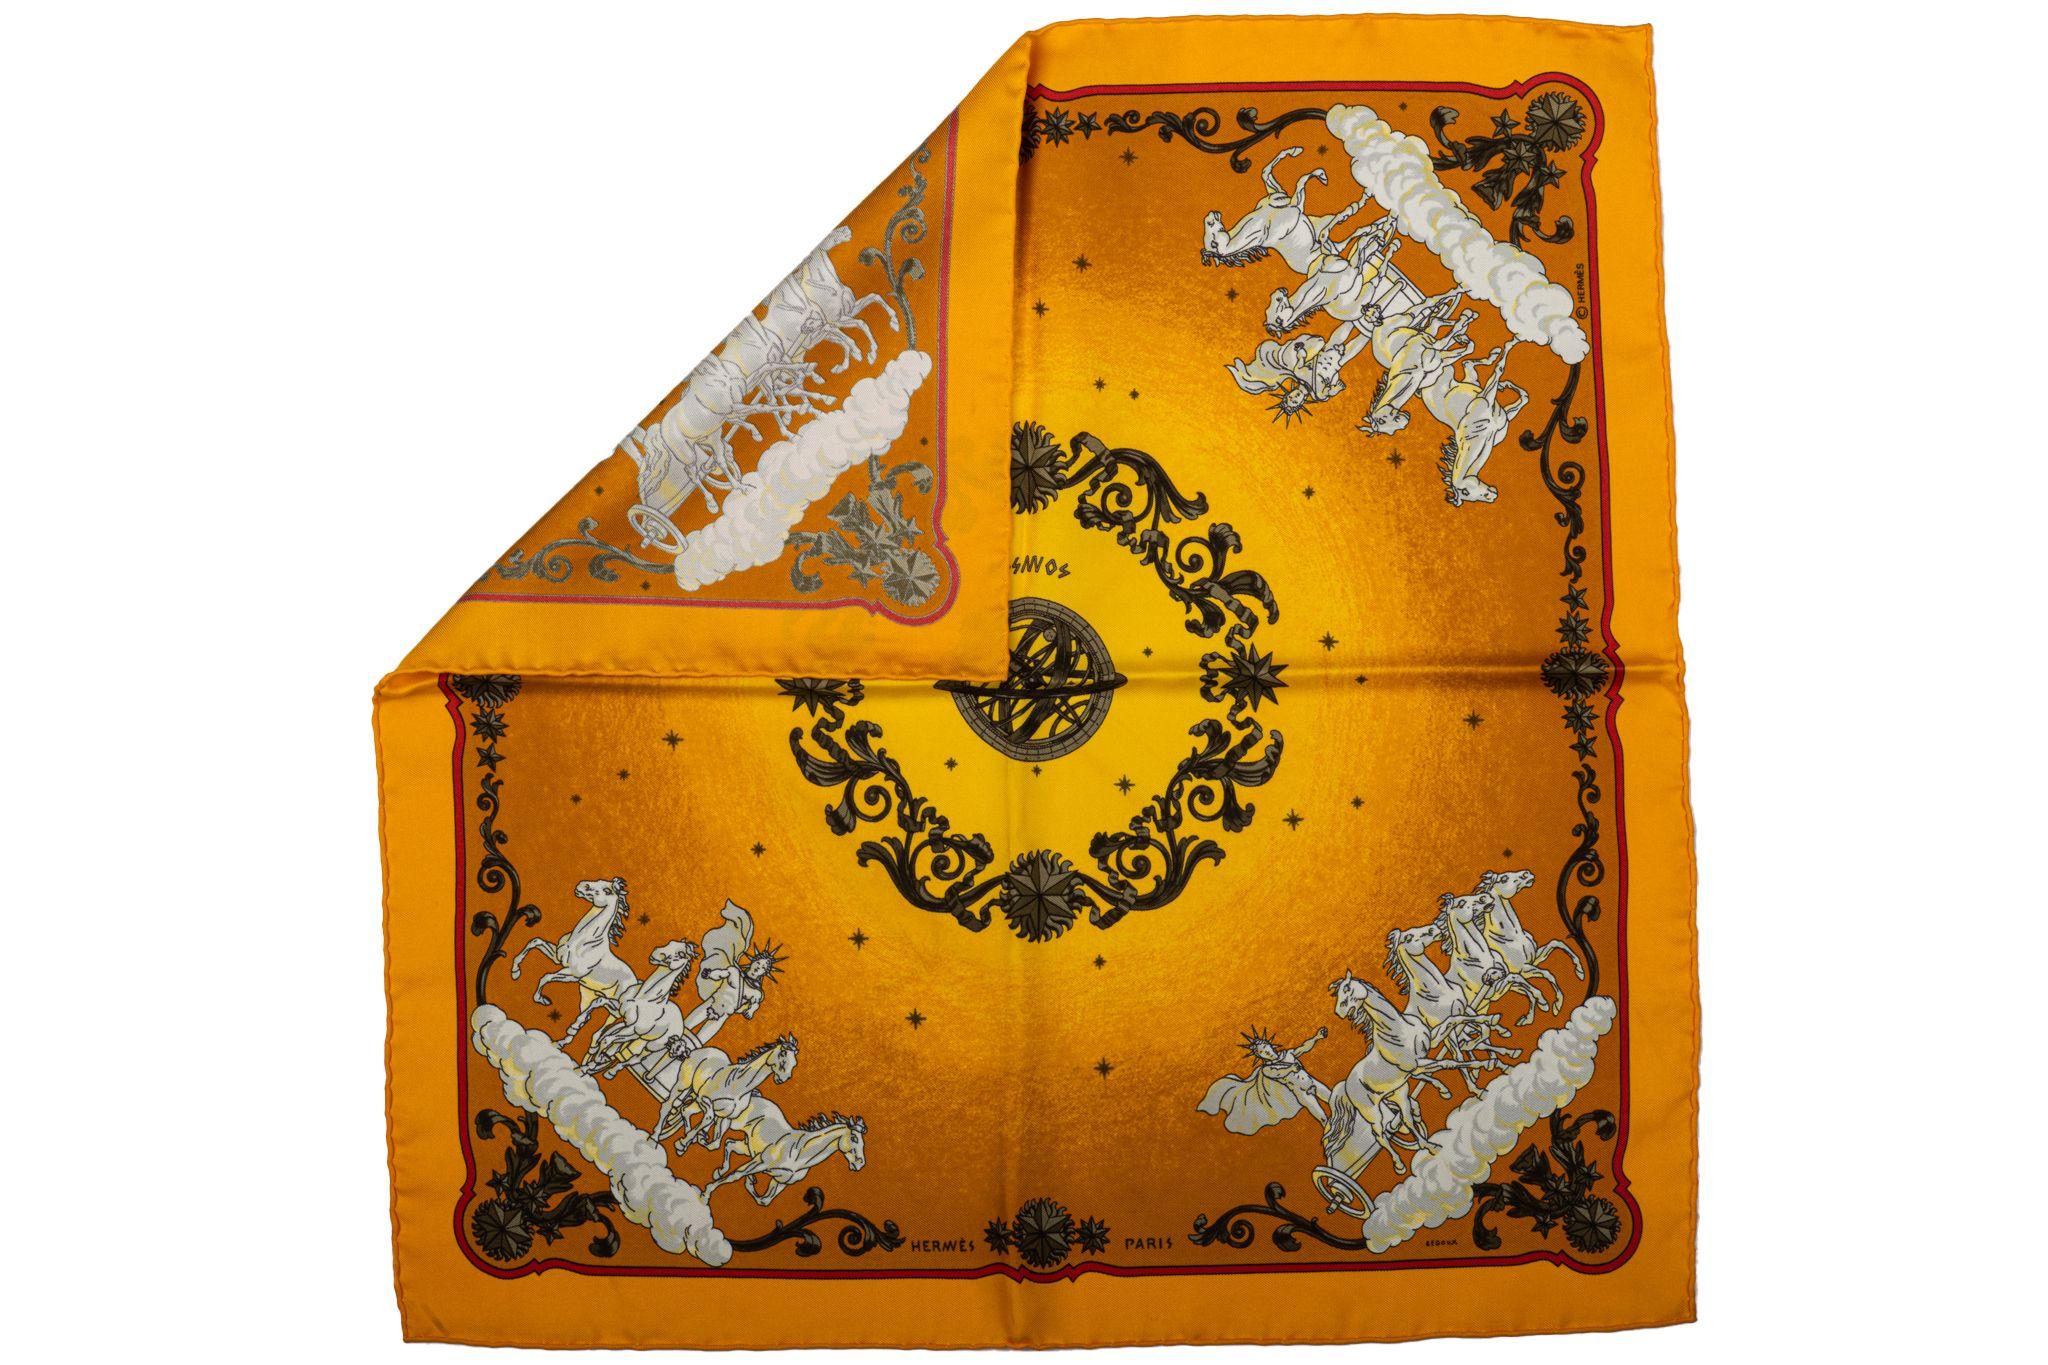 Hermes yellow silk Cosmos print scarf designed by Philippe Ledoux. Hand-rolled edges. Excellent condition.